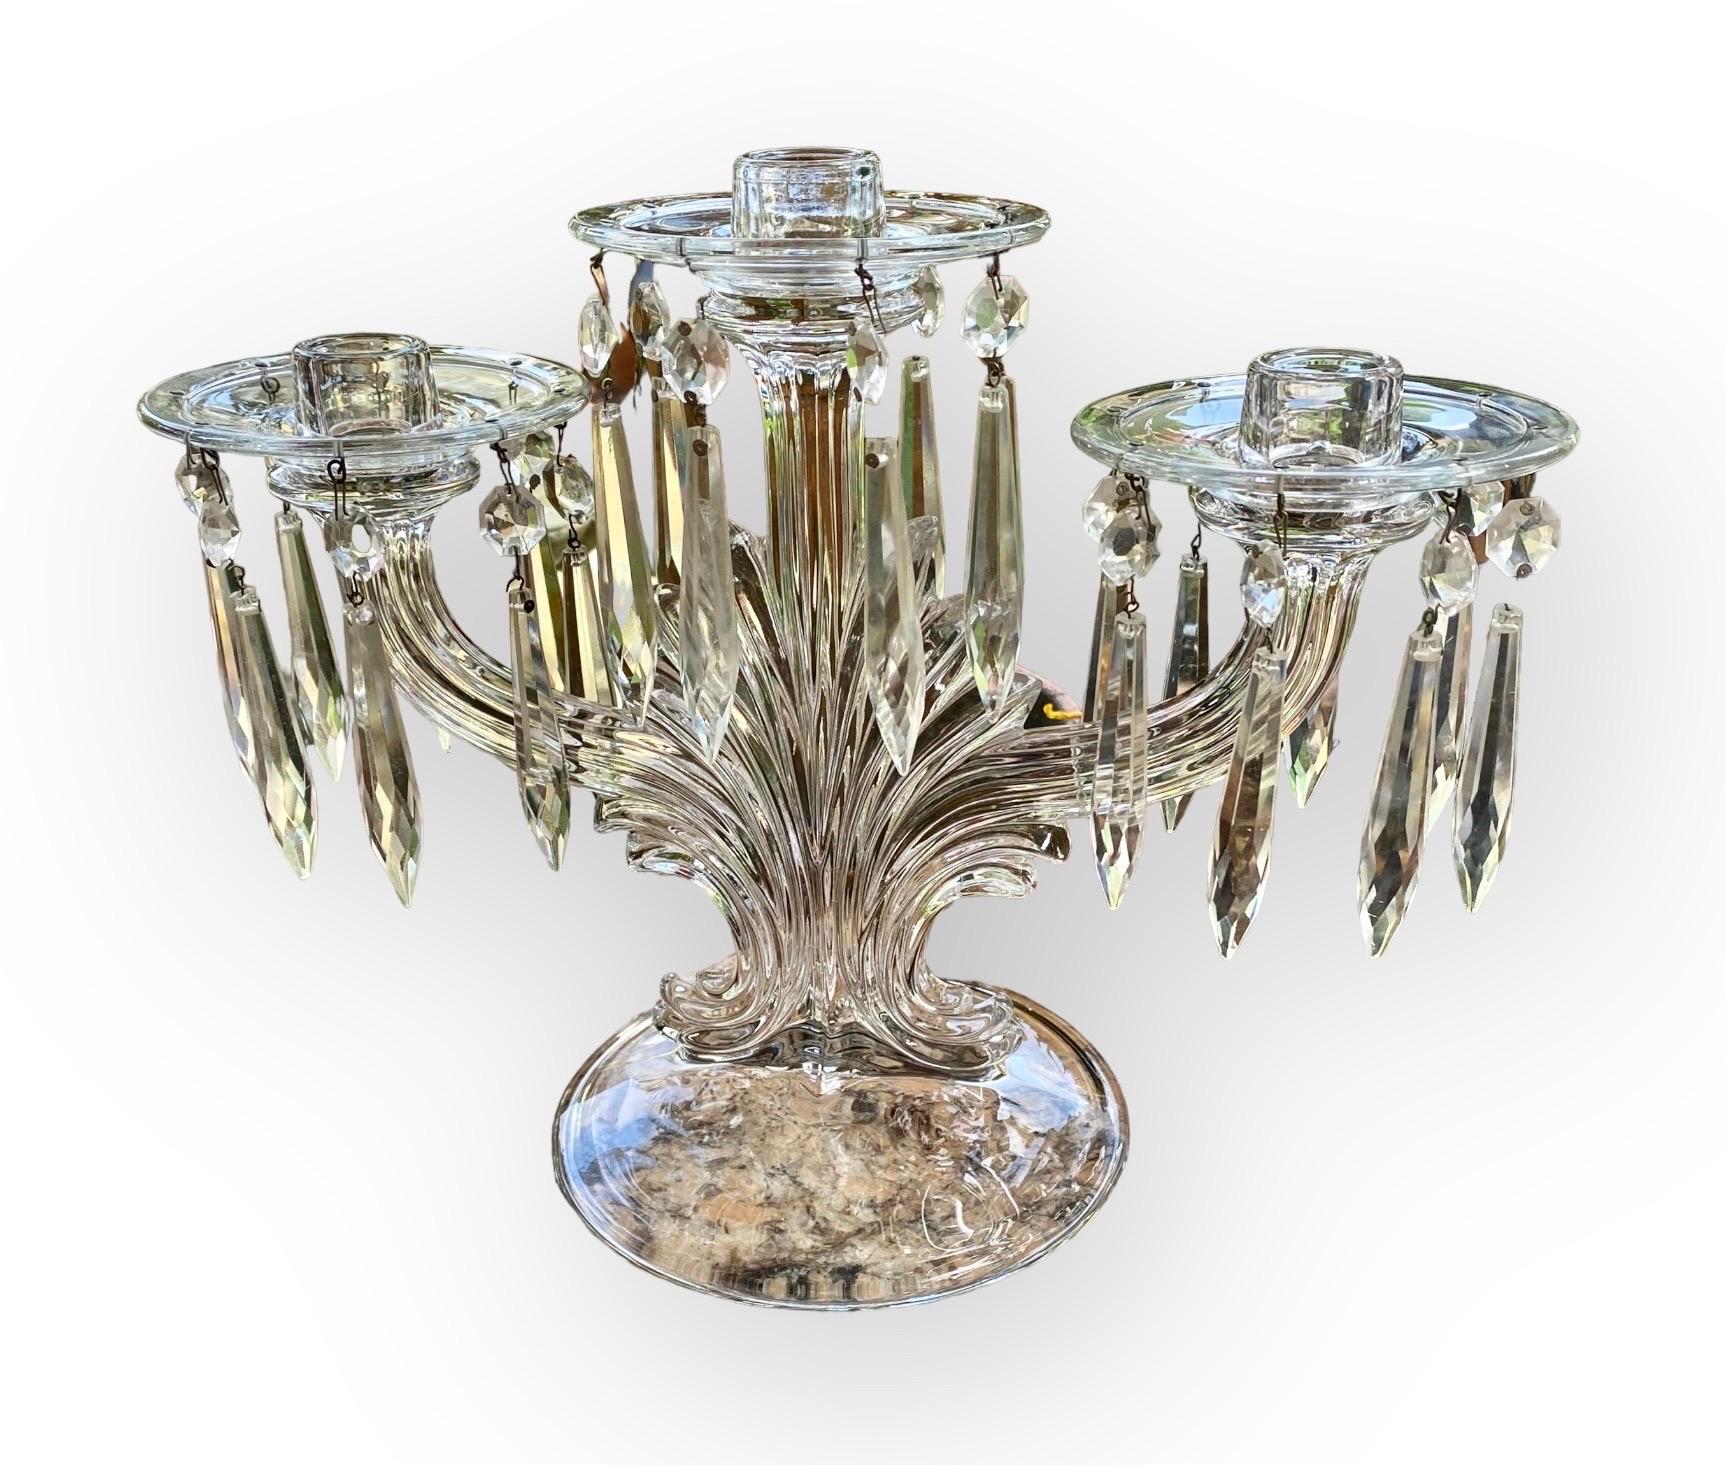 Pair of American Pressed Glass Three Light Candelabra, 2Oth c., on swirled supports with glass bobeches hung with button and spear prisms, on a domed glass base, H.- 9 1/2 in.,
W.- 10 1/4 in., D.- 6 in. Provenance: Property from a distinguished